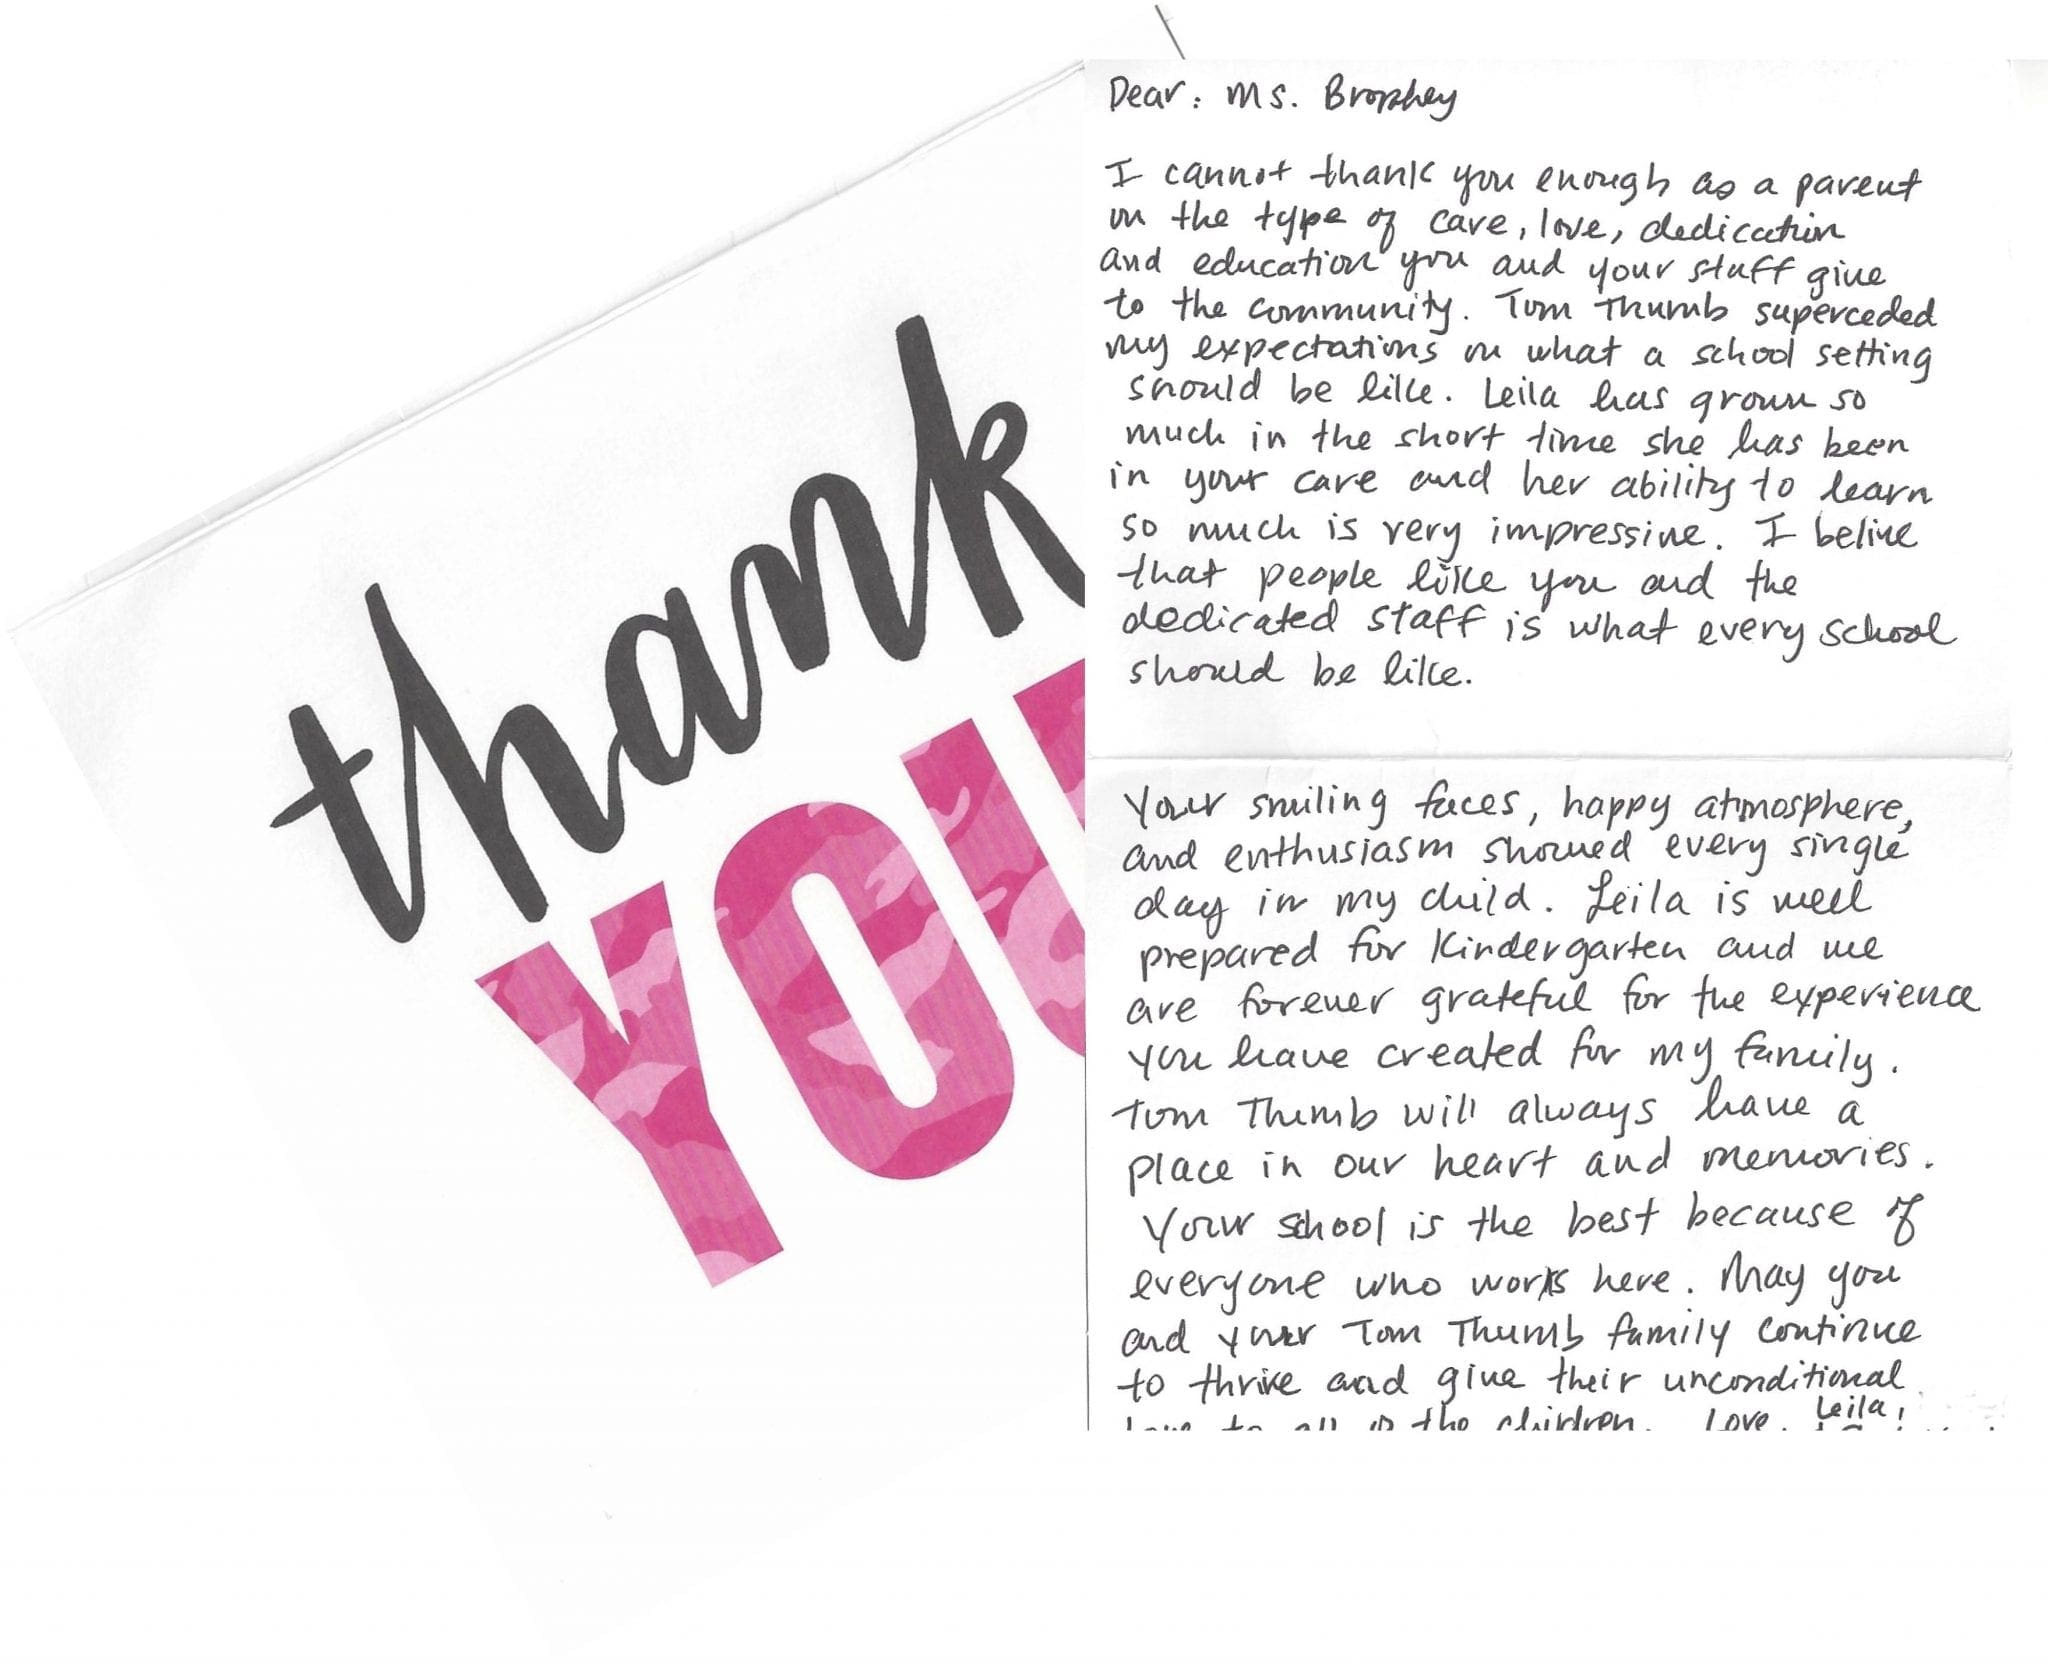 Thank You Note by Leila, Michael and Shelly V.